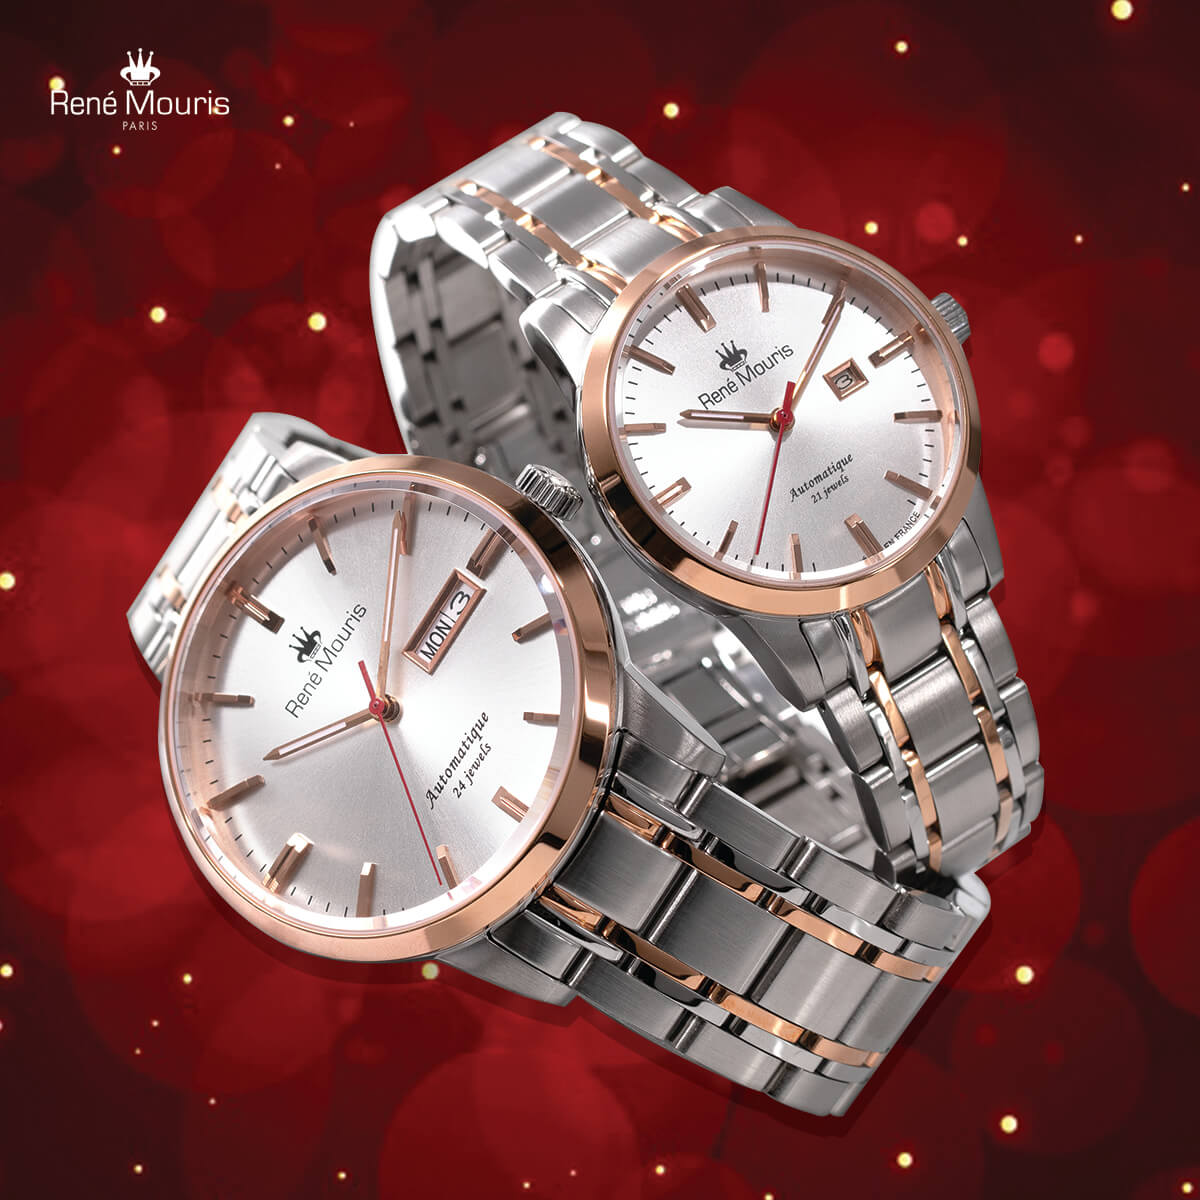 Hot Clock Mens Leather Sports Watches Quartz Led Wall Watch Price  Waterproof Wrist Watch Elegant Analog Luxury Sports Best Gift#8 G1022 From  Catherine07, $22.07 | DHgate.Com